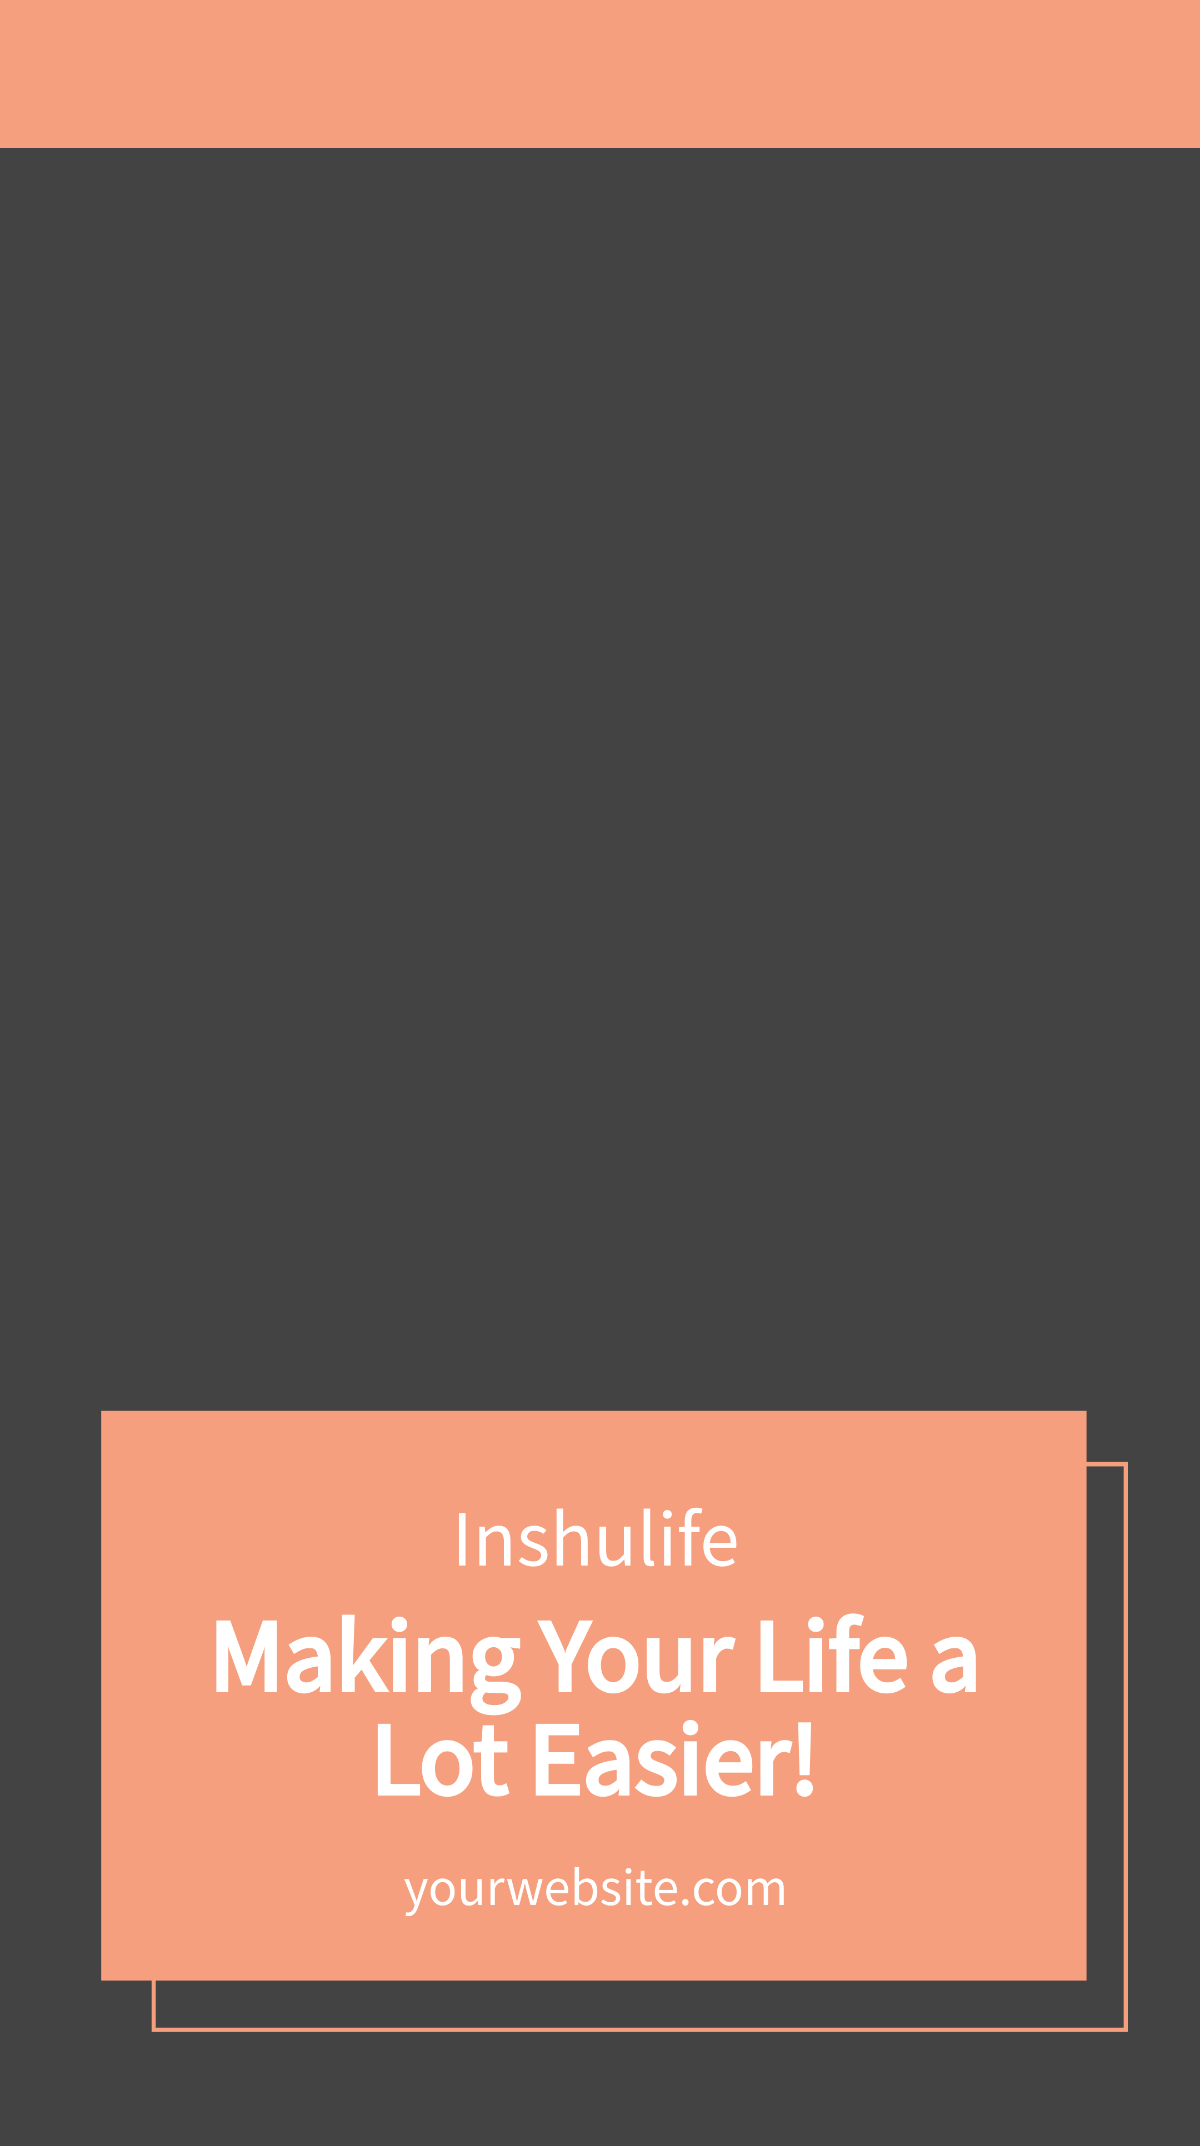 Life Insurance Snapchat Geofilter Template